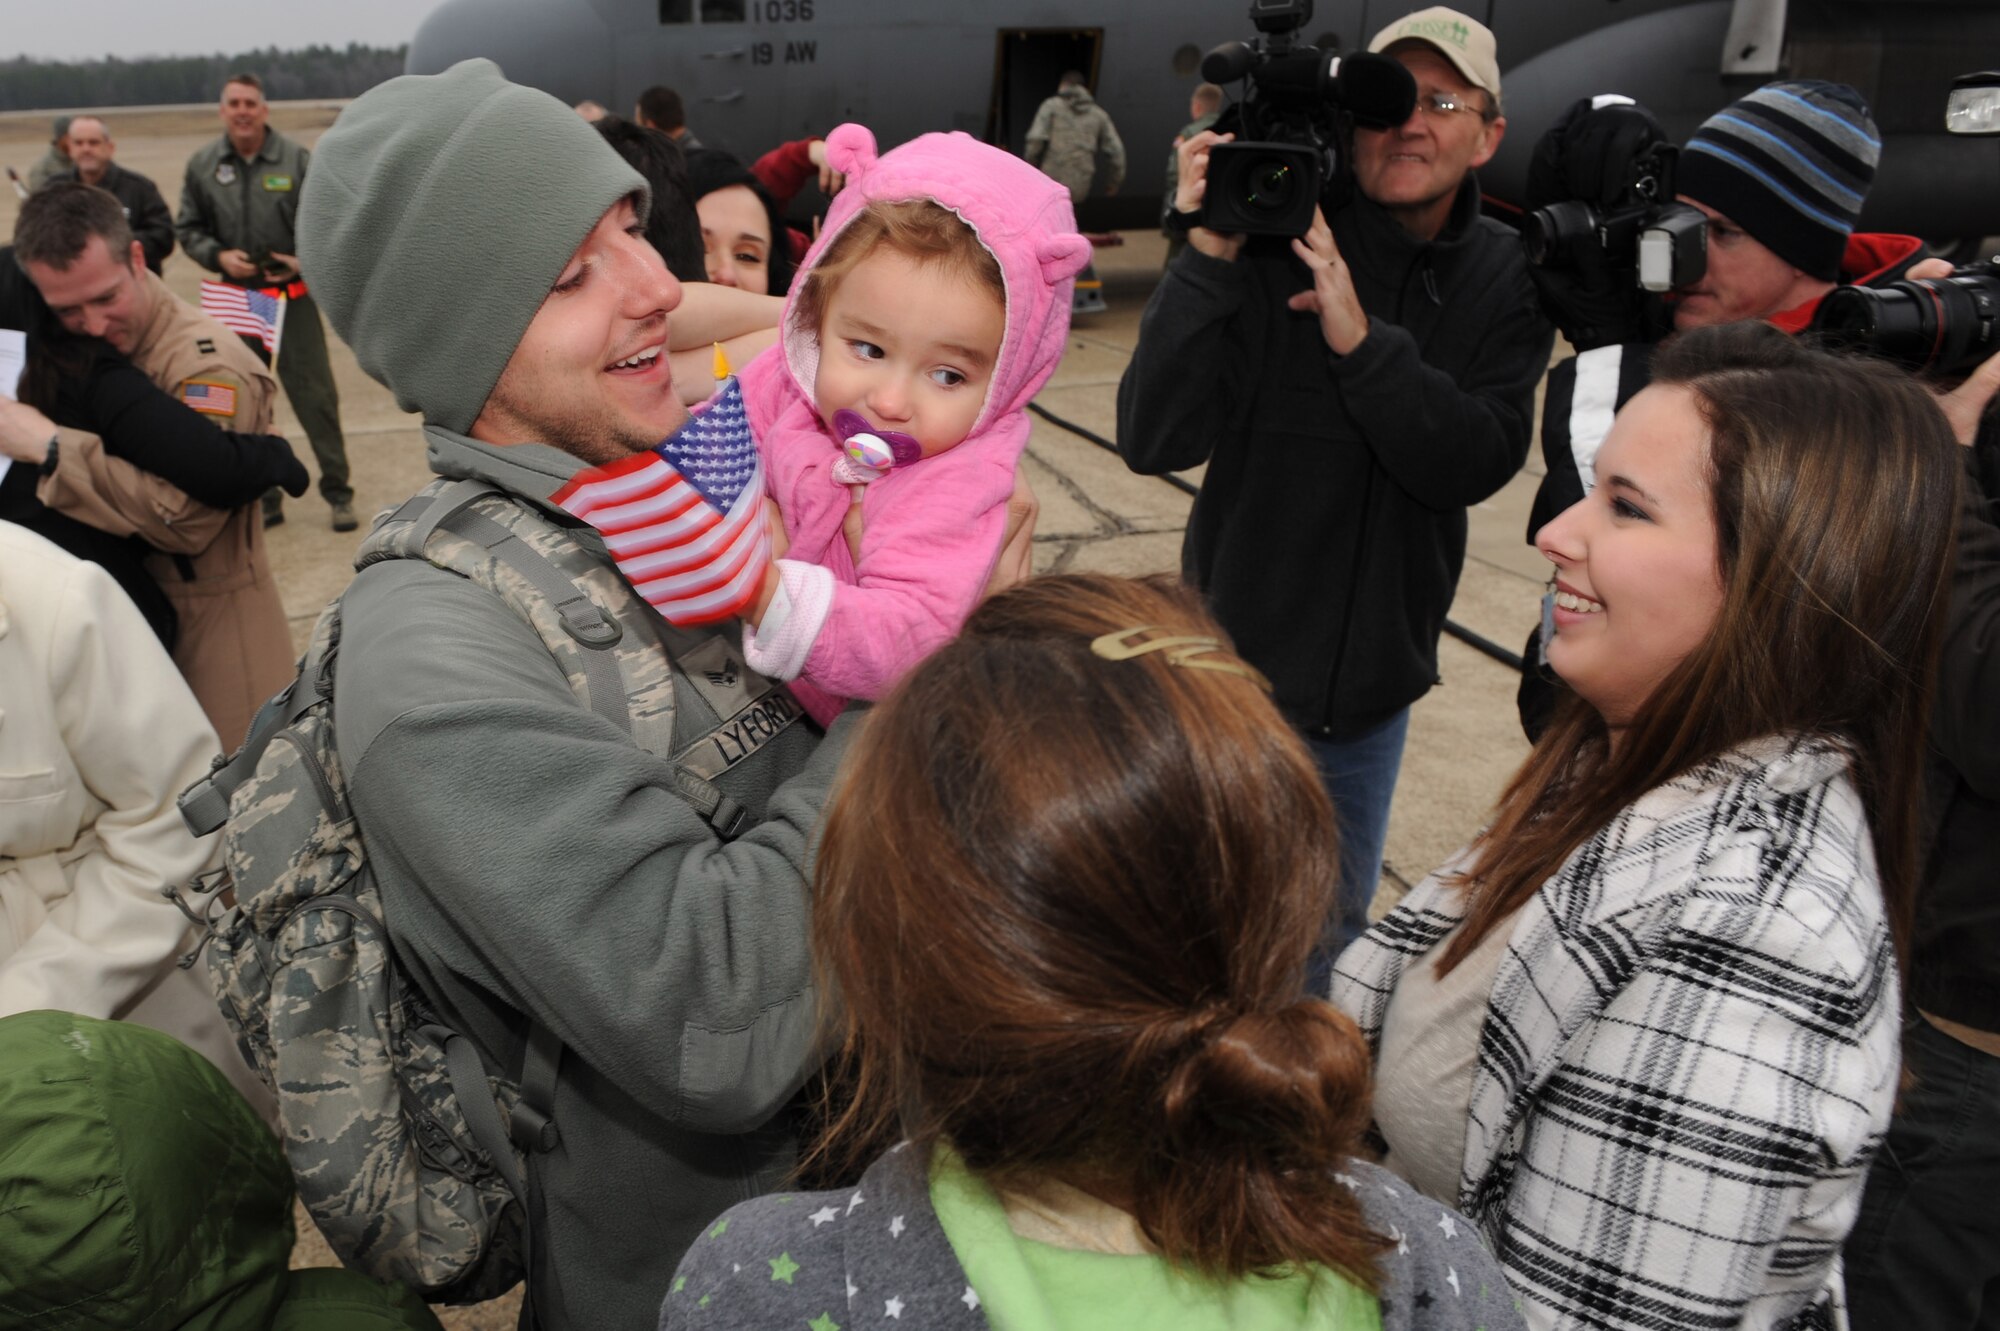 Senior Airman Joshua Lyford, a 19th Aircraft Maintenance Squadron communication navigation mission systems journeyman, hugs his 18-month-old daughter, Kaylee, as his wife Amber, (right), and sister-in-law, Mikayla Wright, also greet him Dec. 23, at Little Rock Air Force Base. Lyford is returning home from a deployment supporting operations in Southwest Asia just days before the holidays. (U.S. Air Force photo by Tech. Sgt. Chad Chisholm)